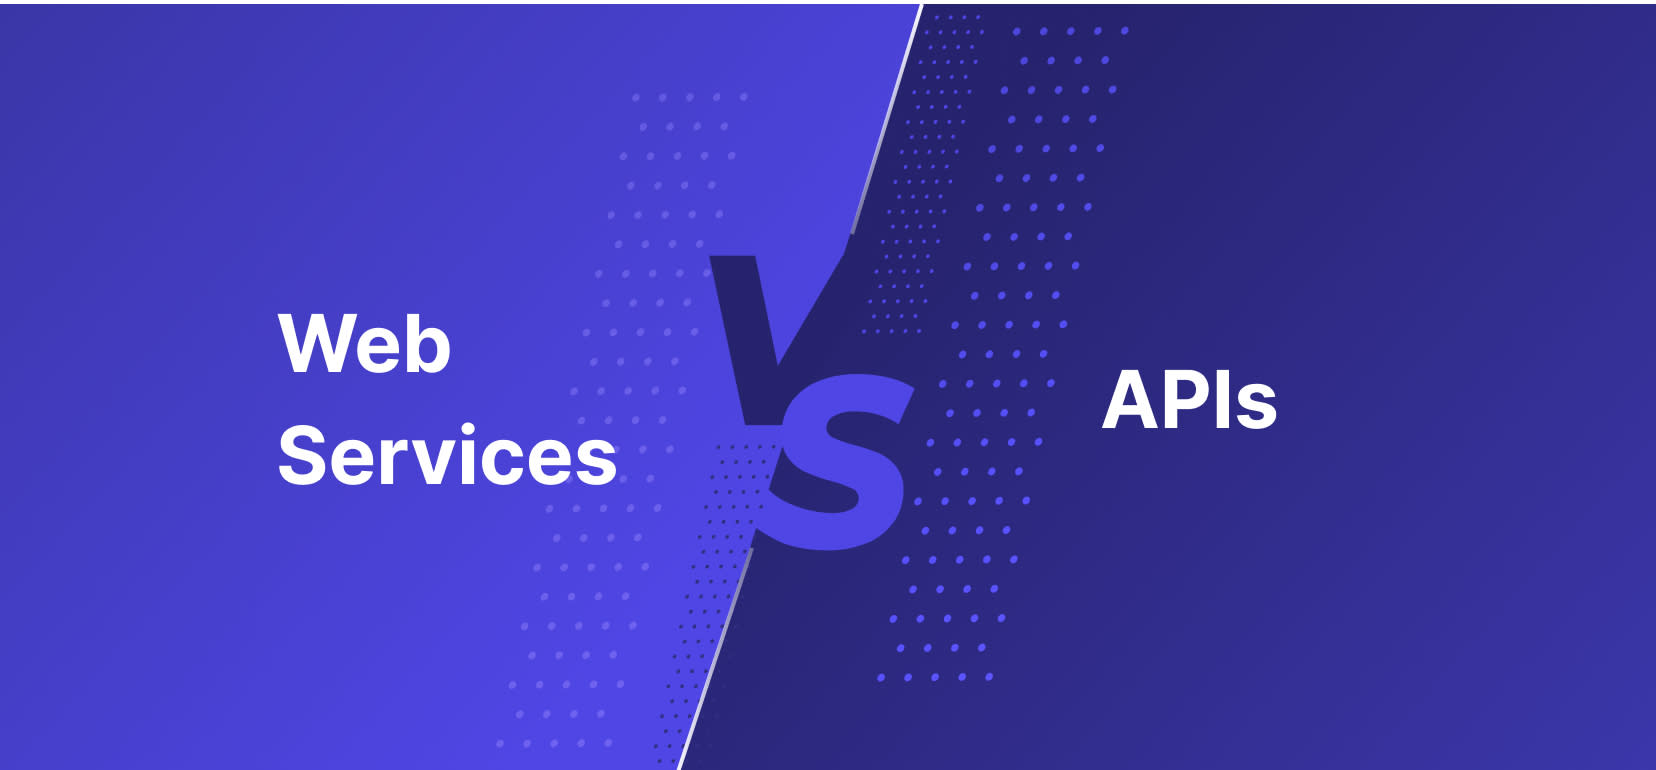 Web Services vs. API: Differences, Similarities, and Everything You Need to Know